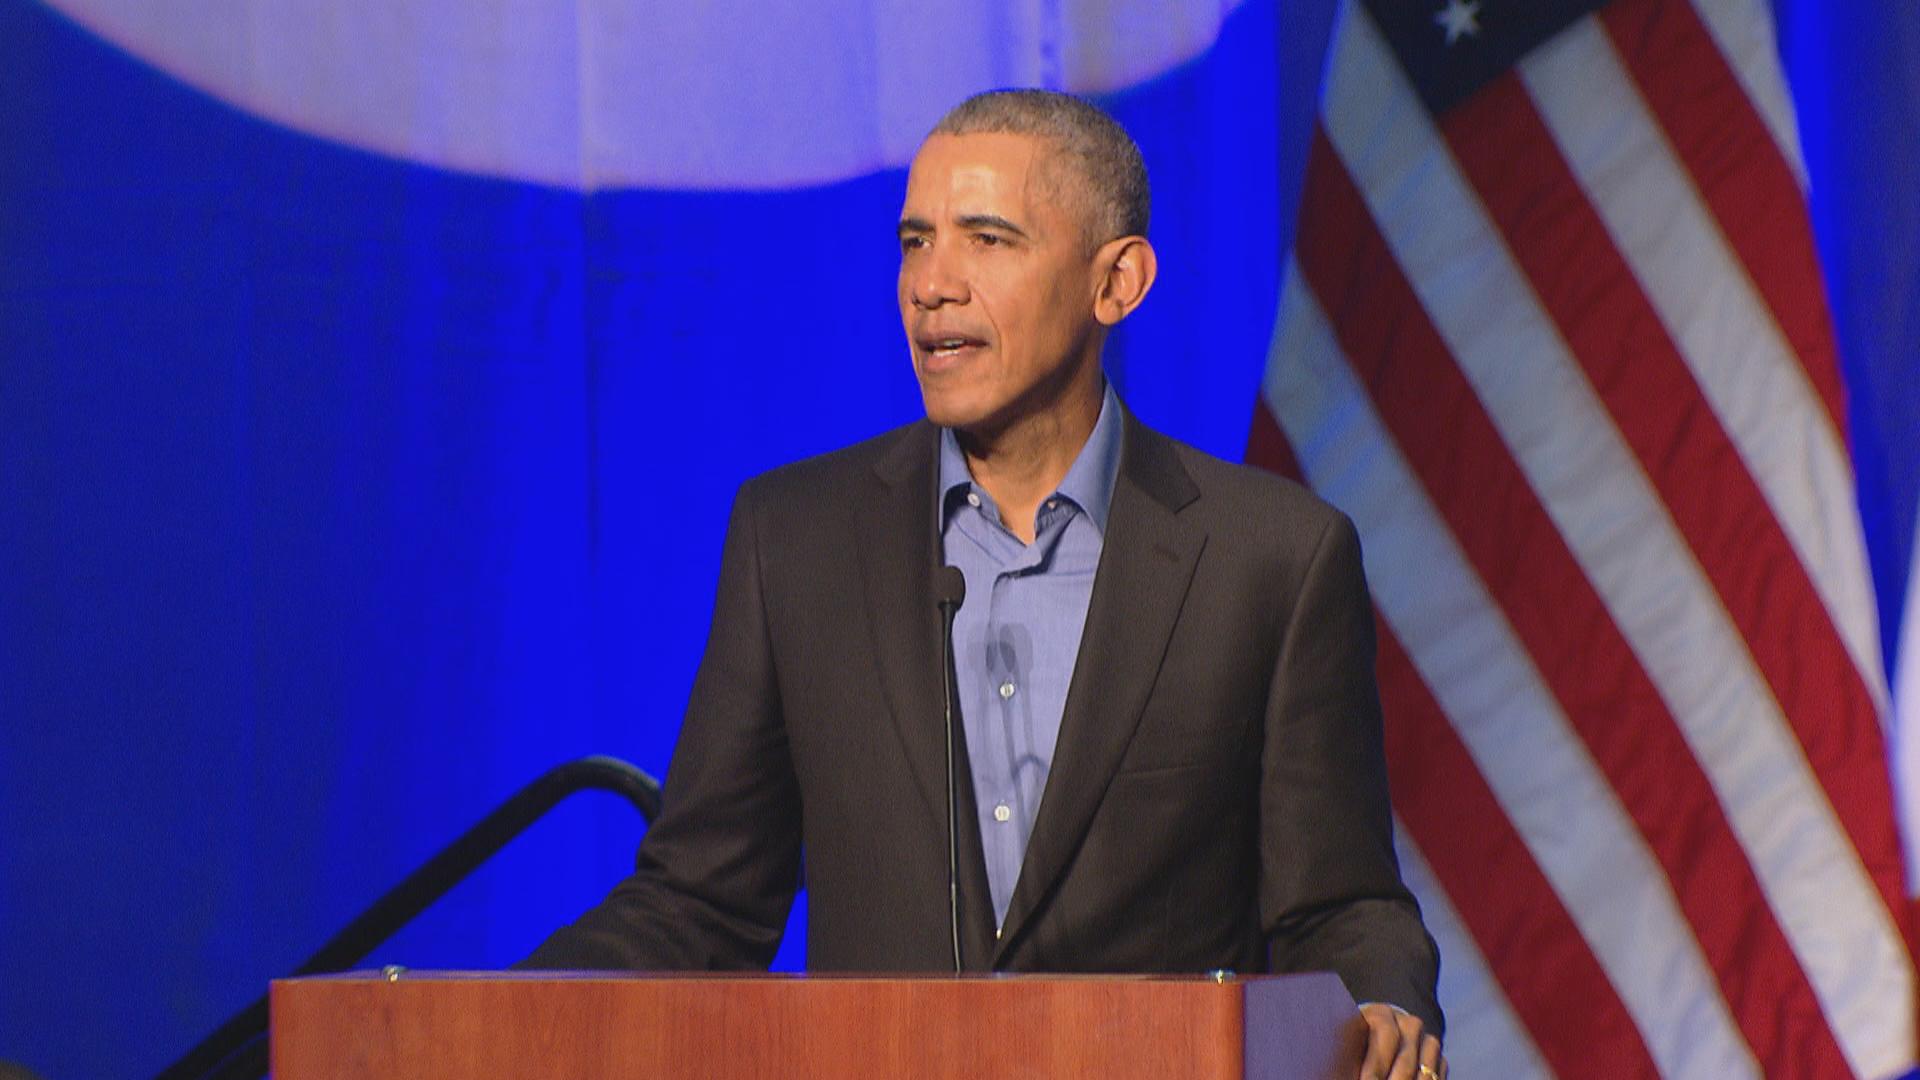 Former President Barack Obama speaks Tuesday during a climate change summit in Chicago. (Chicago Tonight)